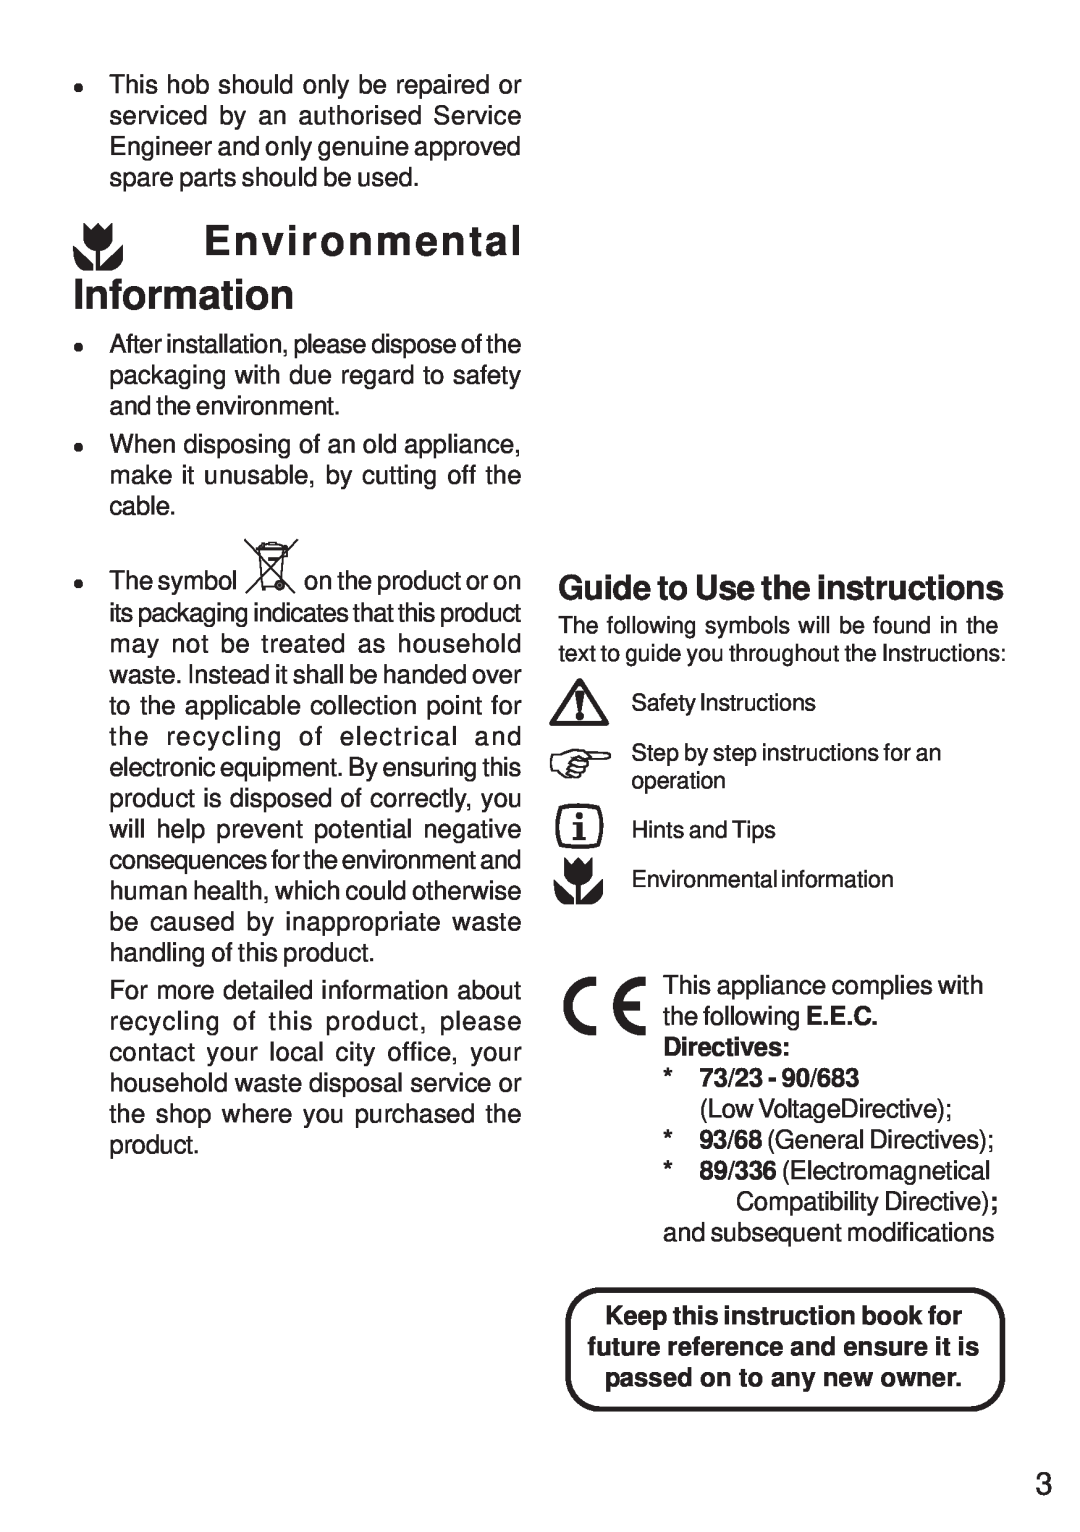 Moffat MEH 631 manual Environmental Information, Guide to Use the instructions, Directives 73/23 - 90/683 